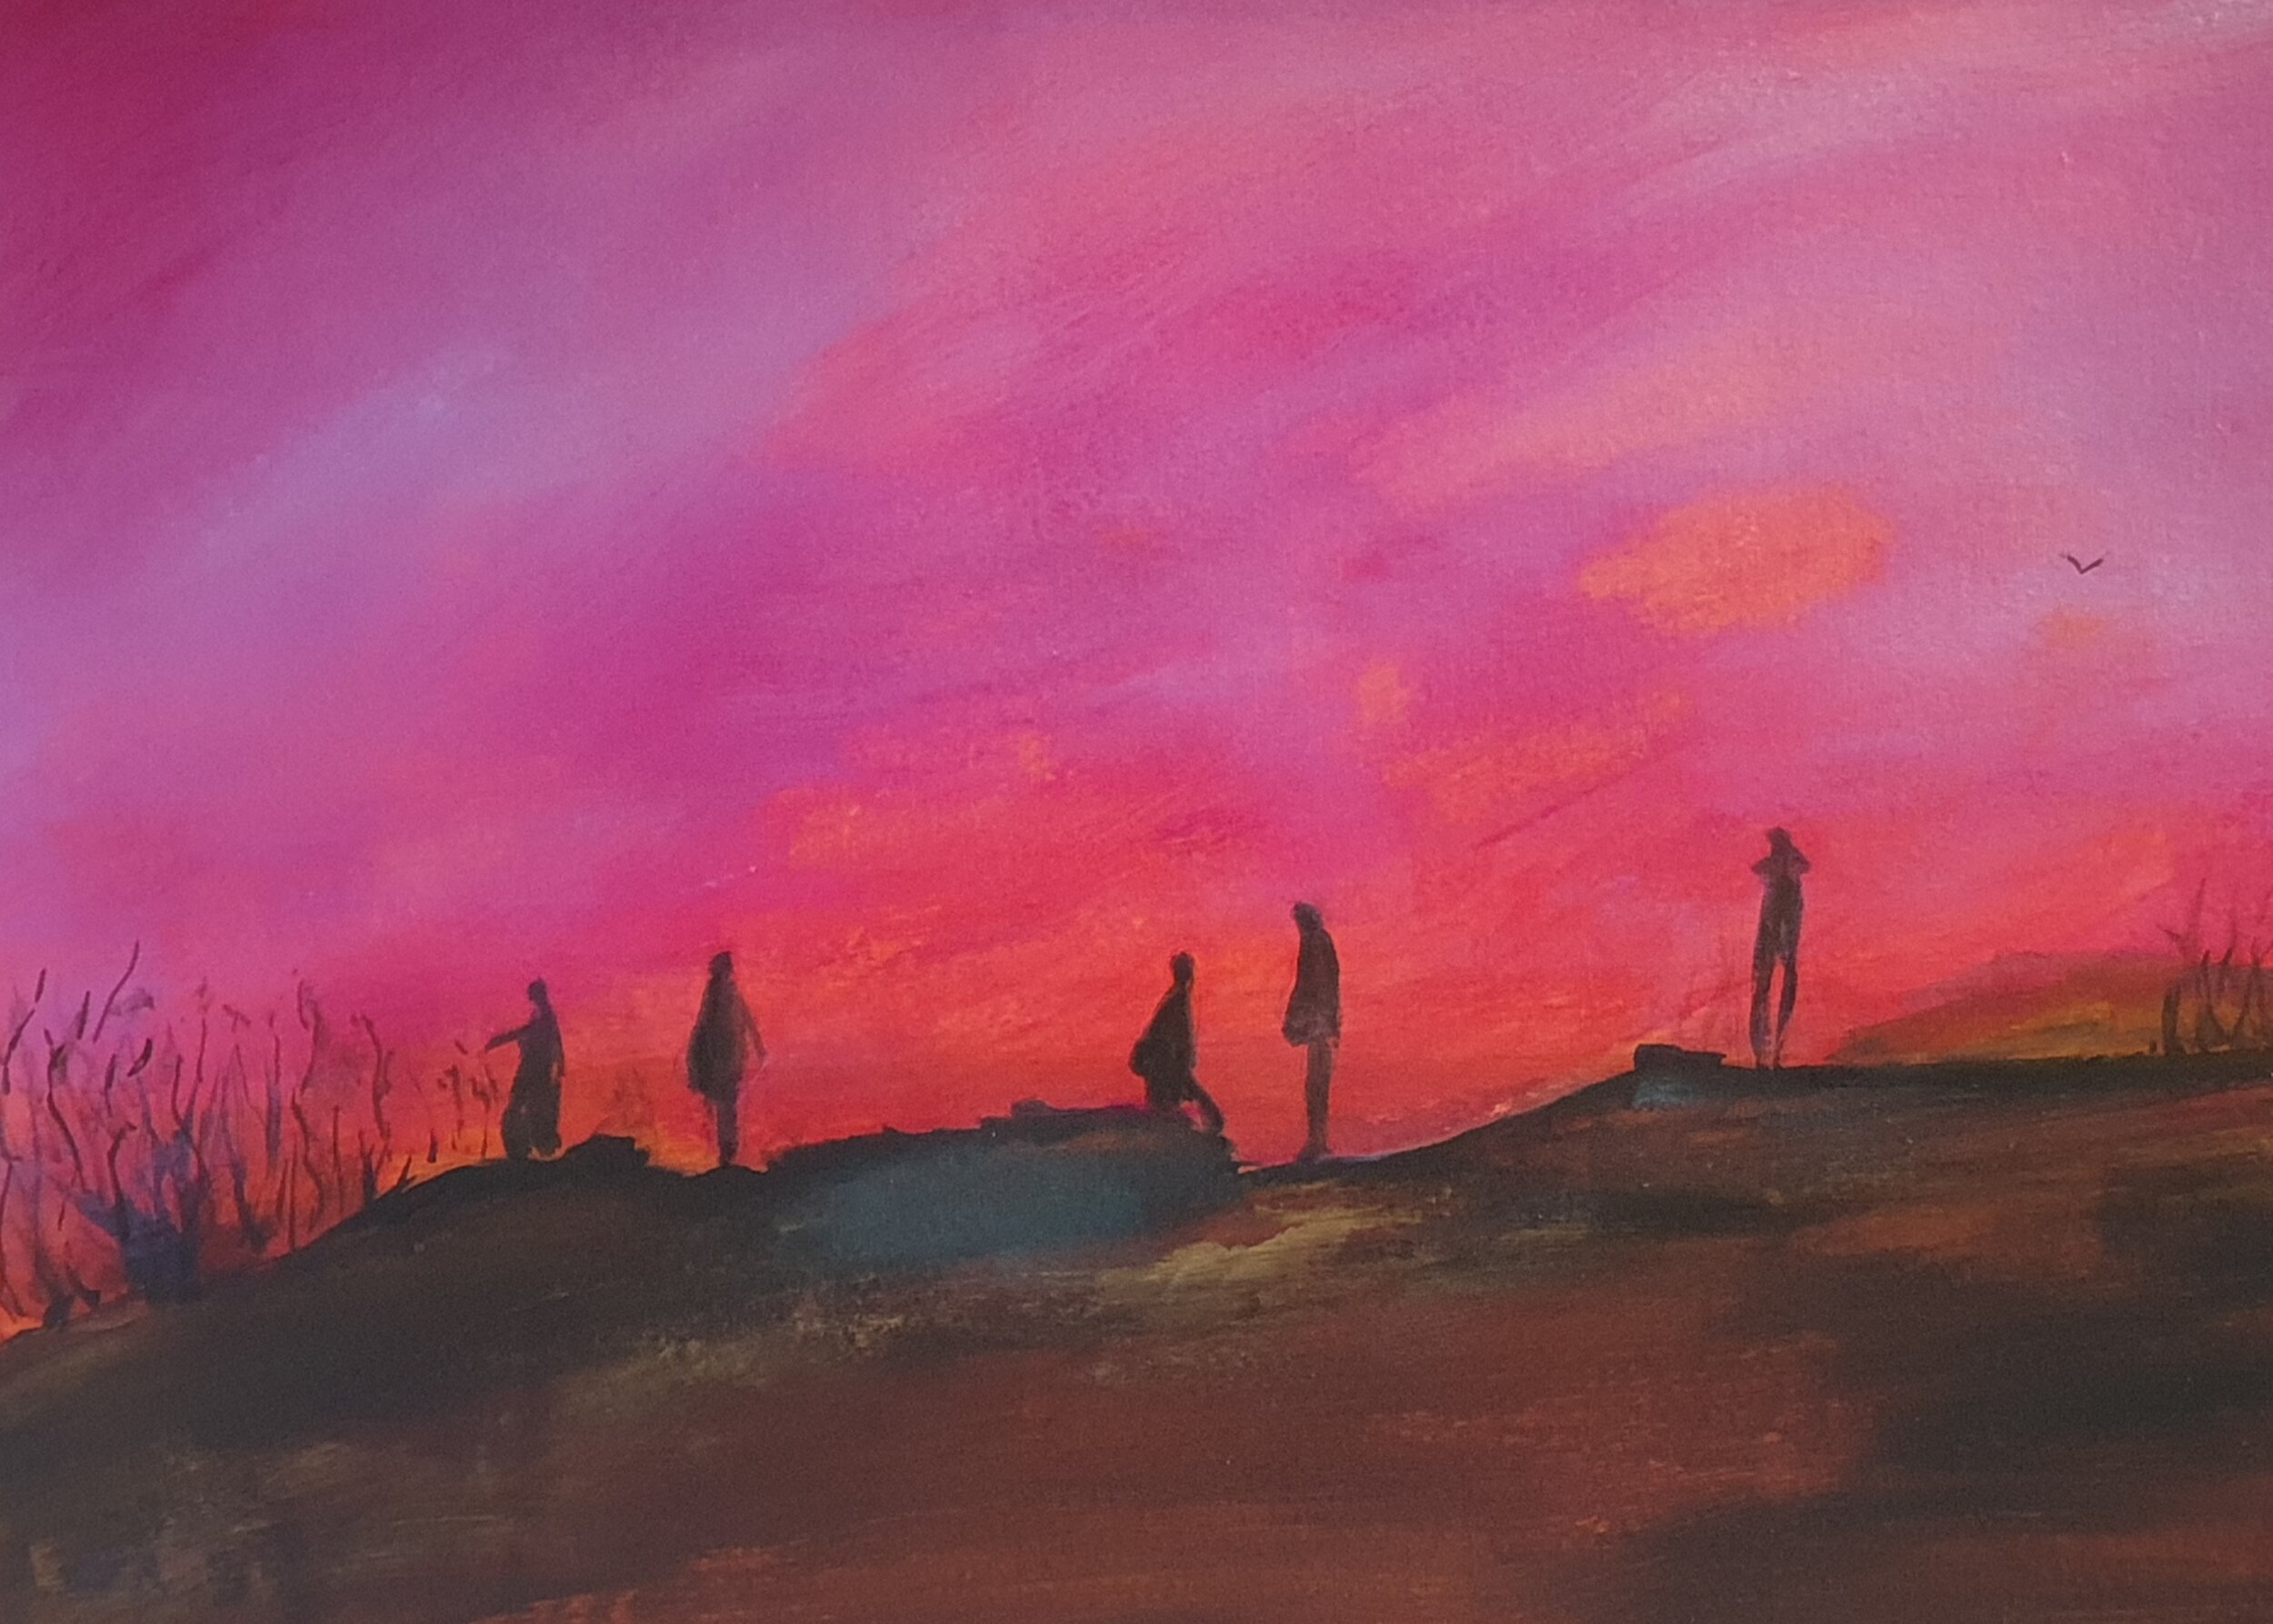 Sunrise at Abriachan - acrylic on paper